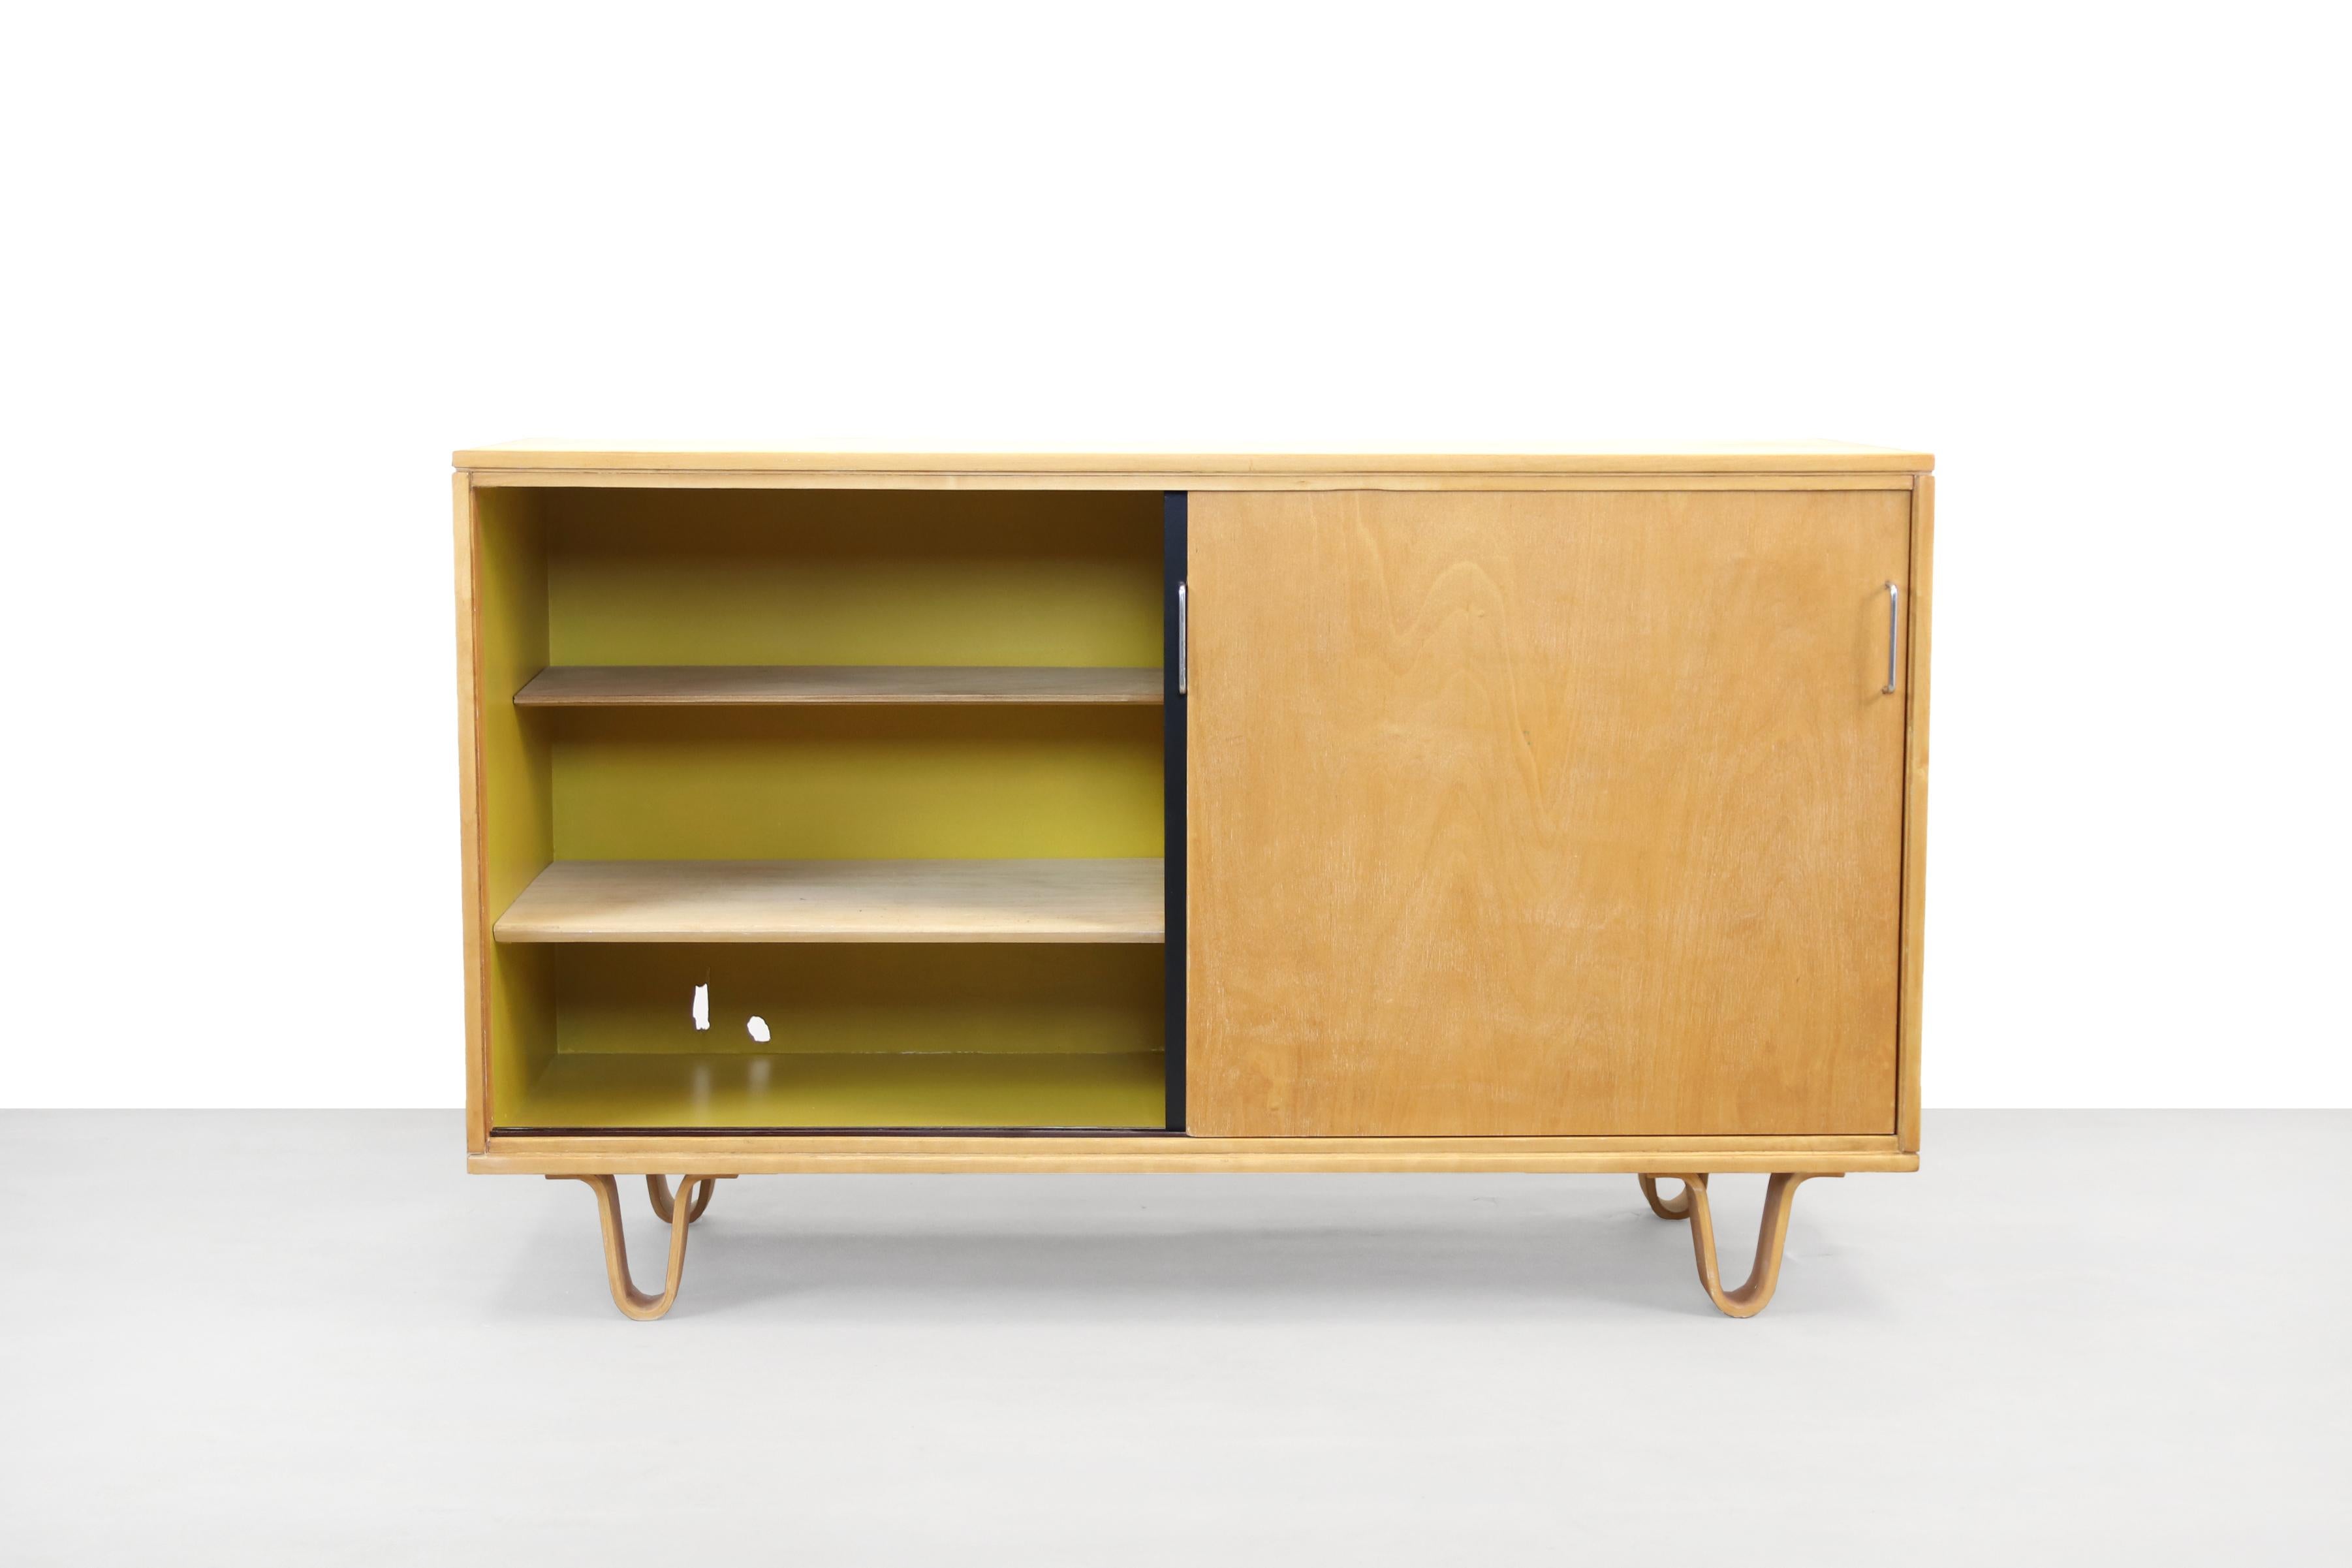 Beautiful, uncommon sideboard from the Birch series by Cees Braakman for Pastoe. The sideboard has 2 sliding doors, one of which is painted black, and is made entirely of birch wood. The famous plywood bentwood legs are iconic to this line. The